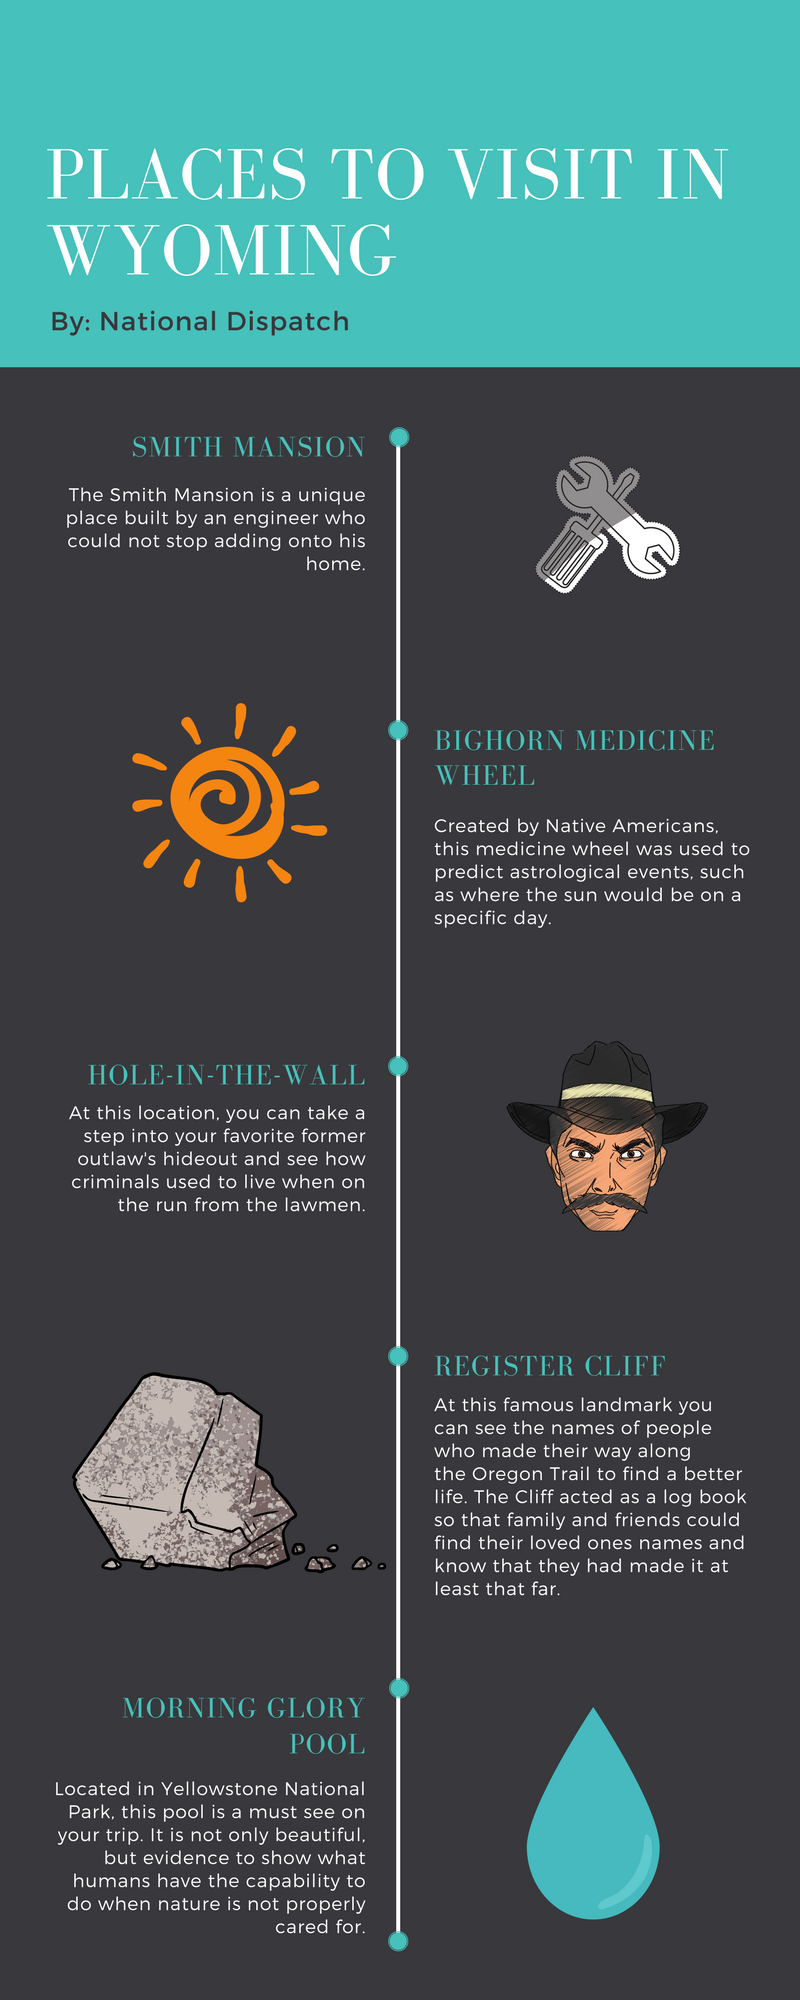 Places to Visit in Wyoming Infographic